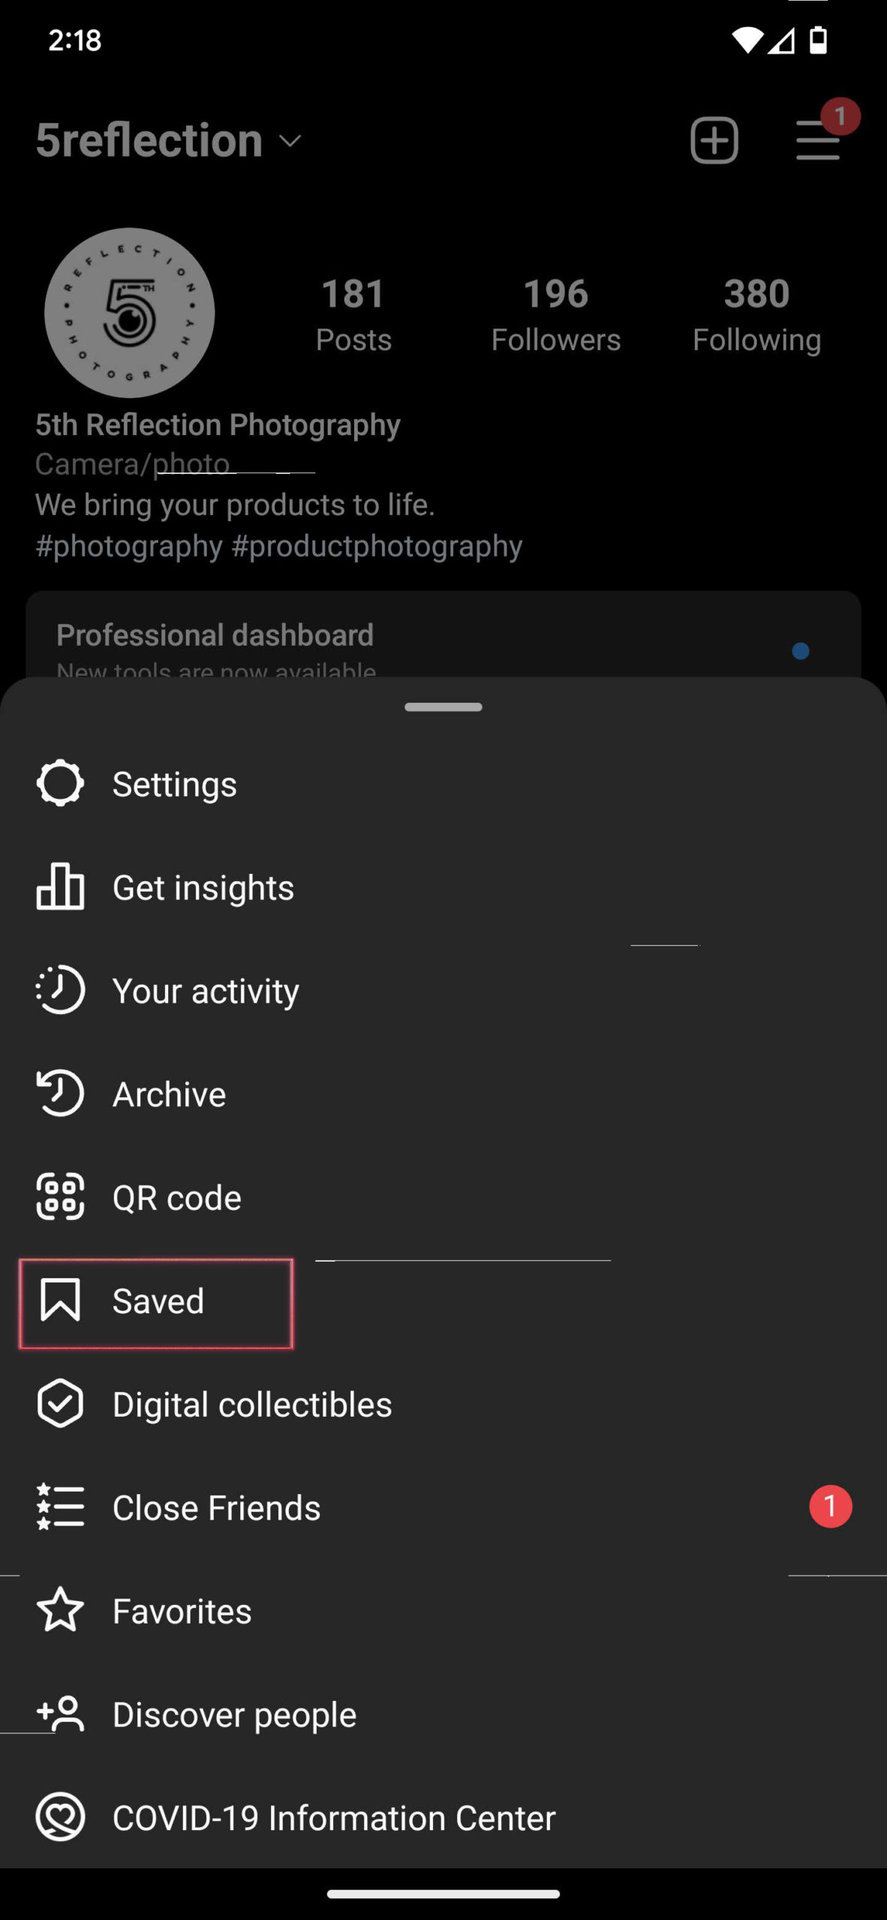 How to save images on Instagram 3